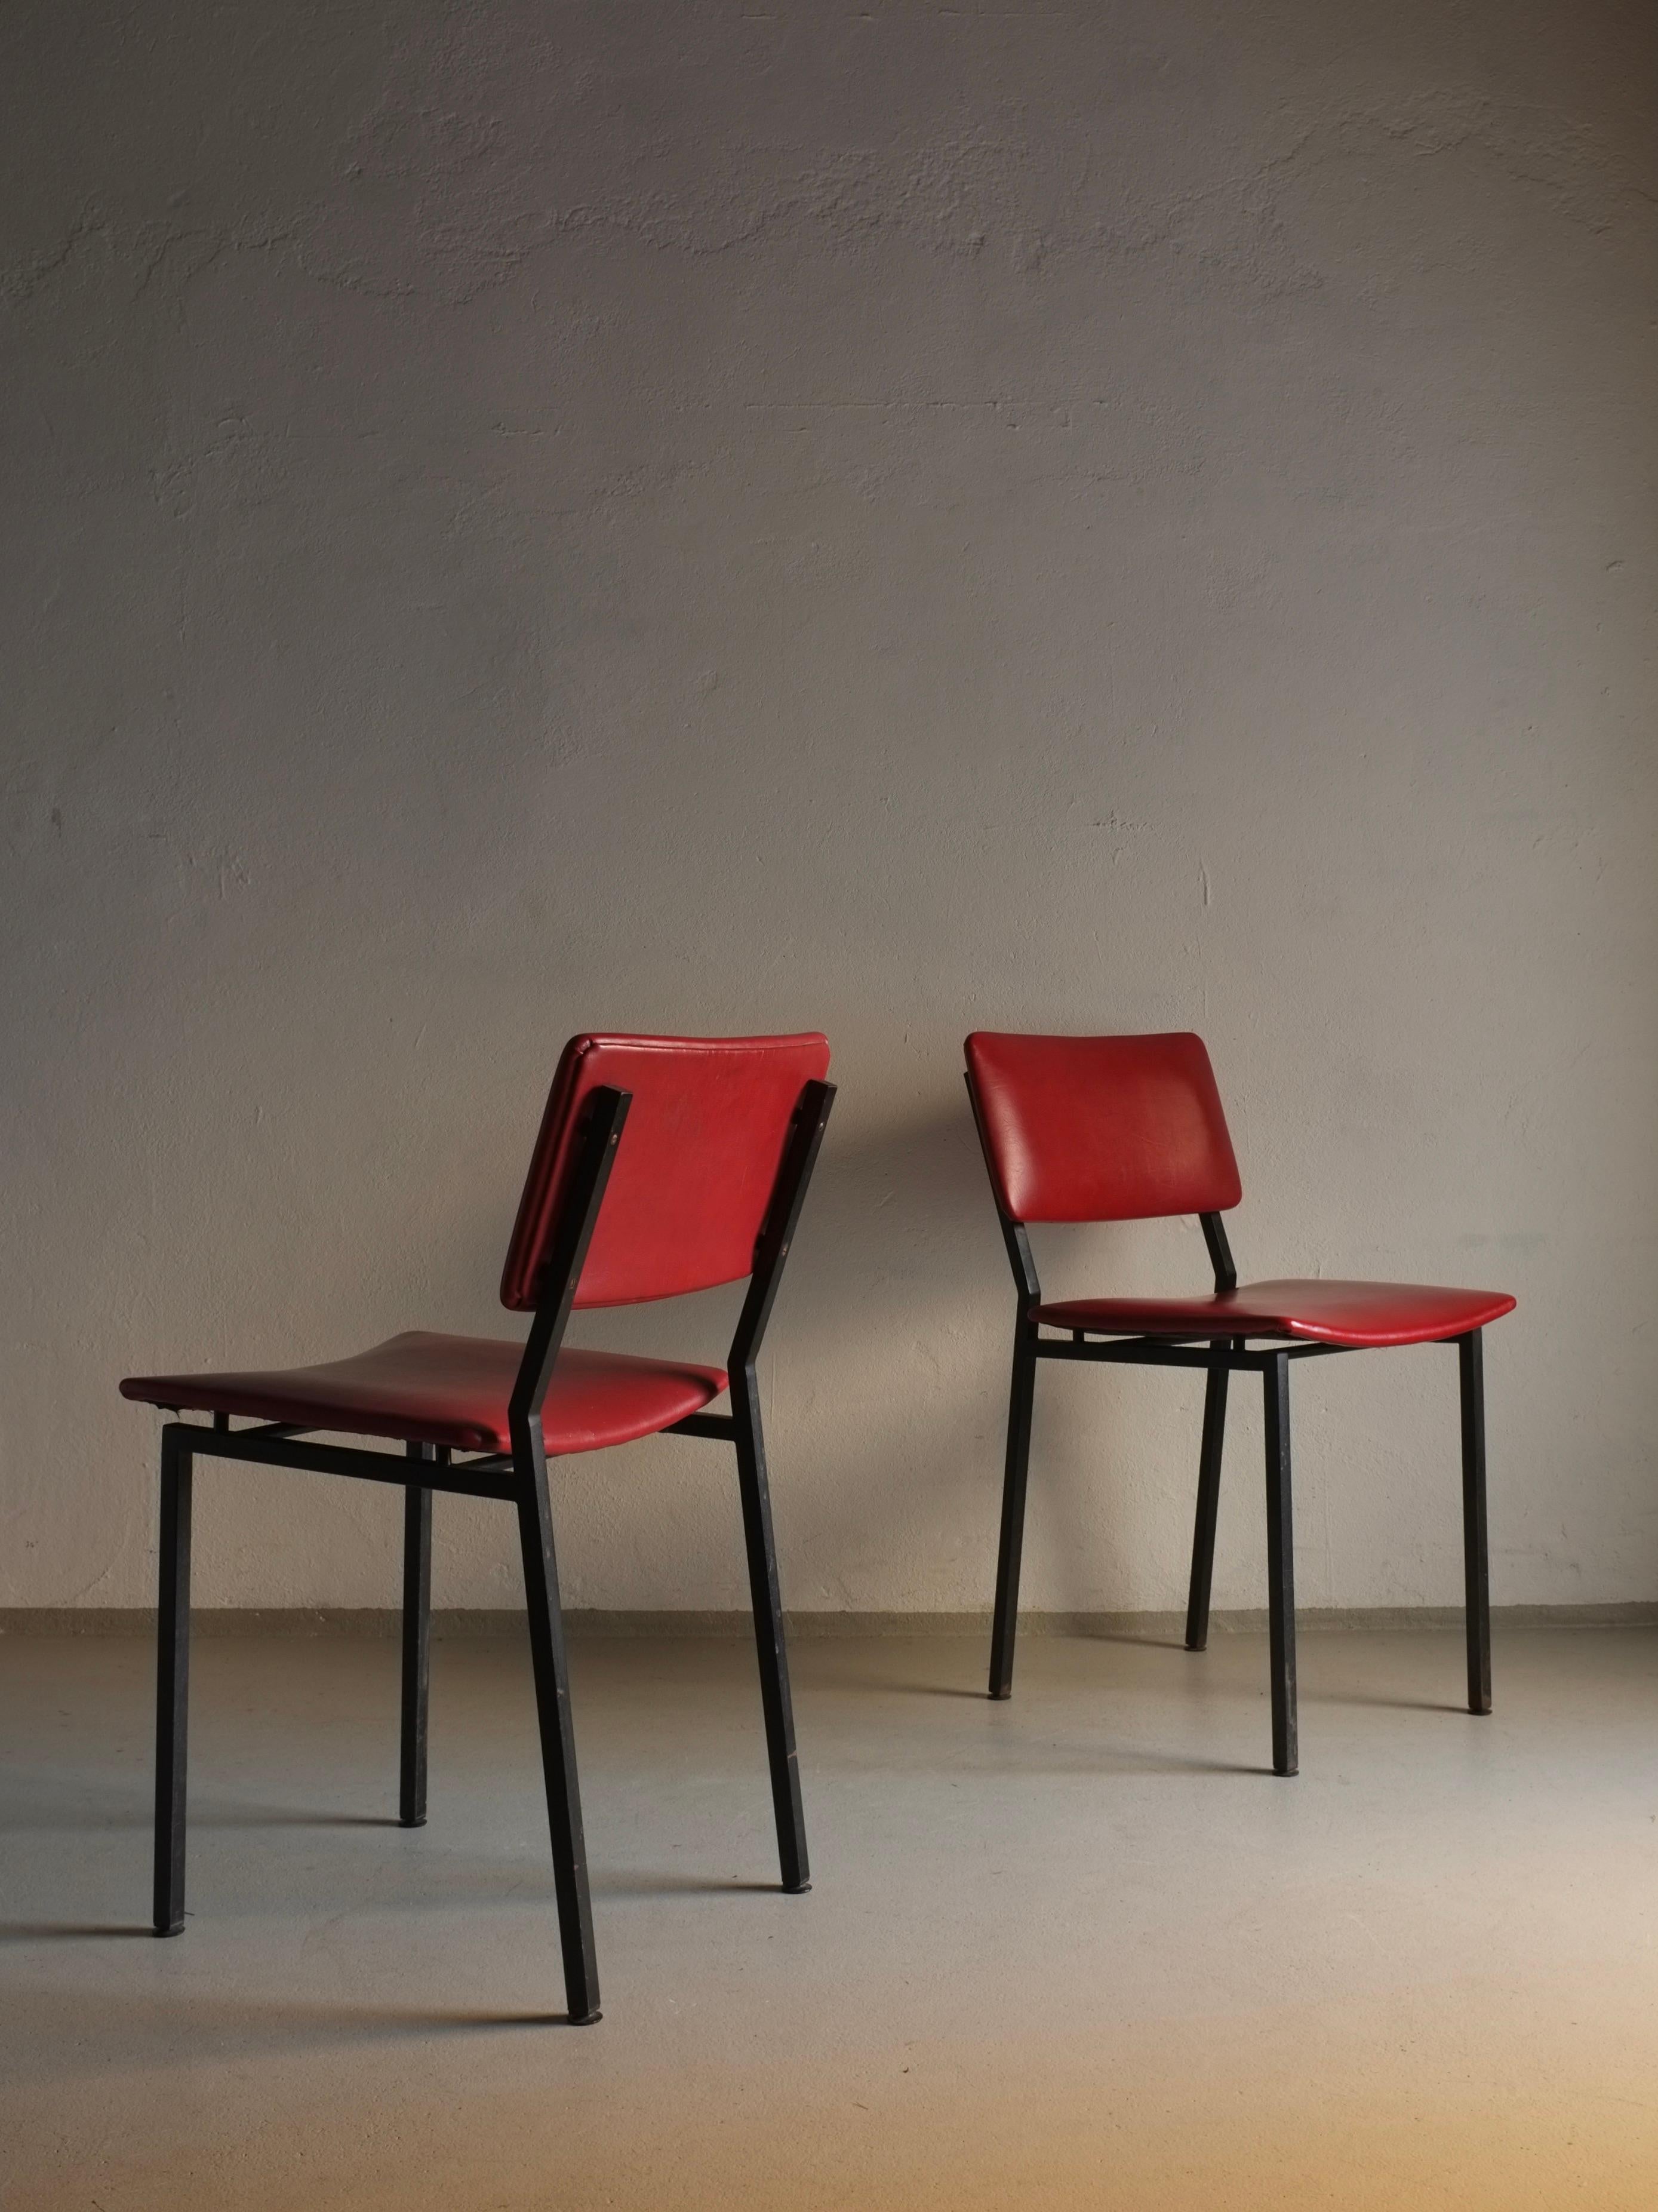 Minimalist Set of 2 Black Metal Chairs by Gerrit Veenendaal For Kembo, Netherlands 1960s For Sale